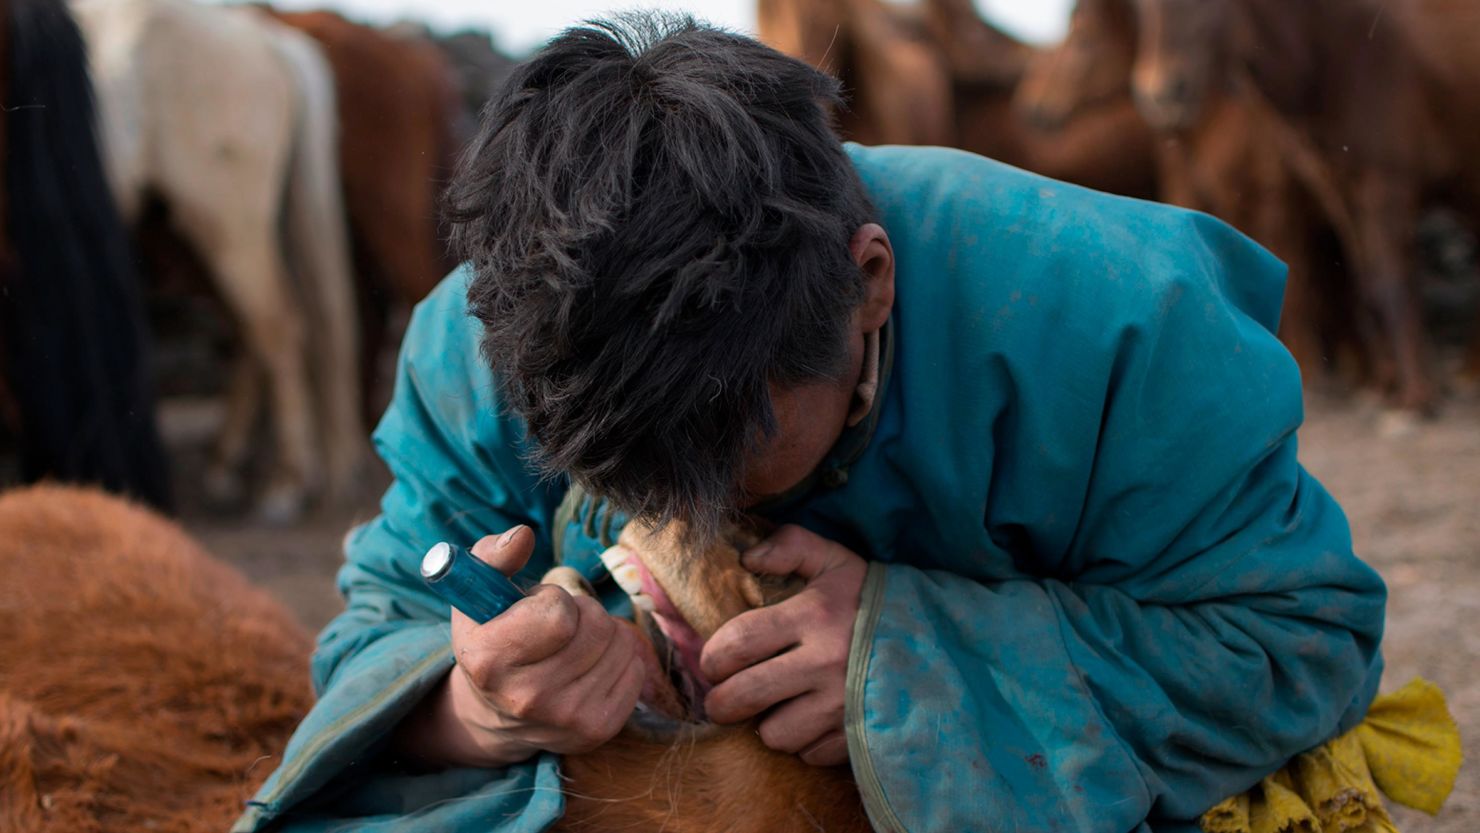 Mongolian herder removing first premolar, or wolf tooth, from a young horse during the spring roundup using a screwdriver.